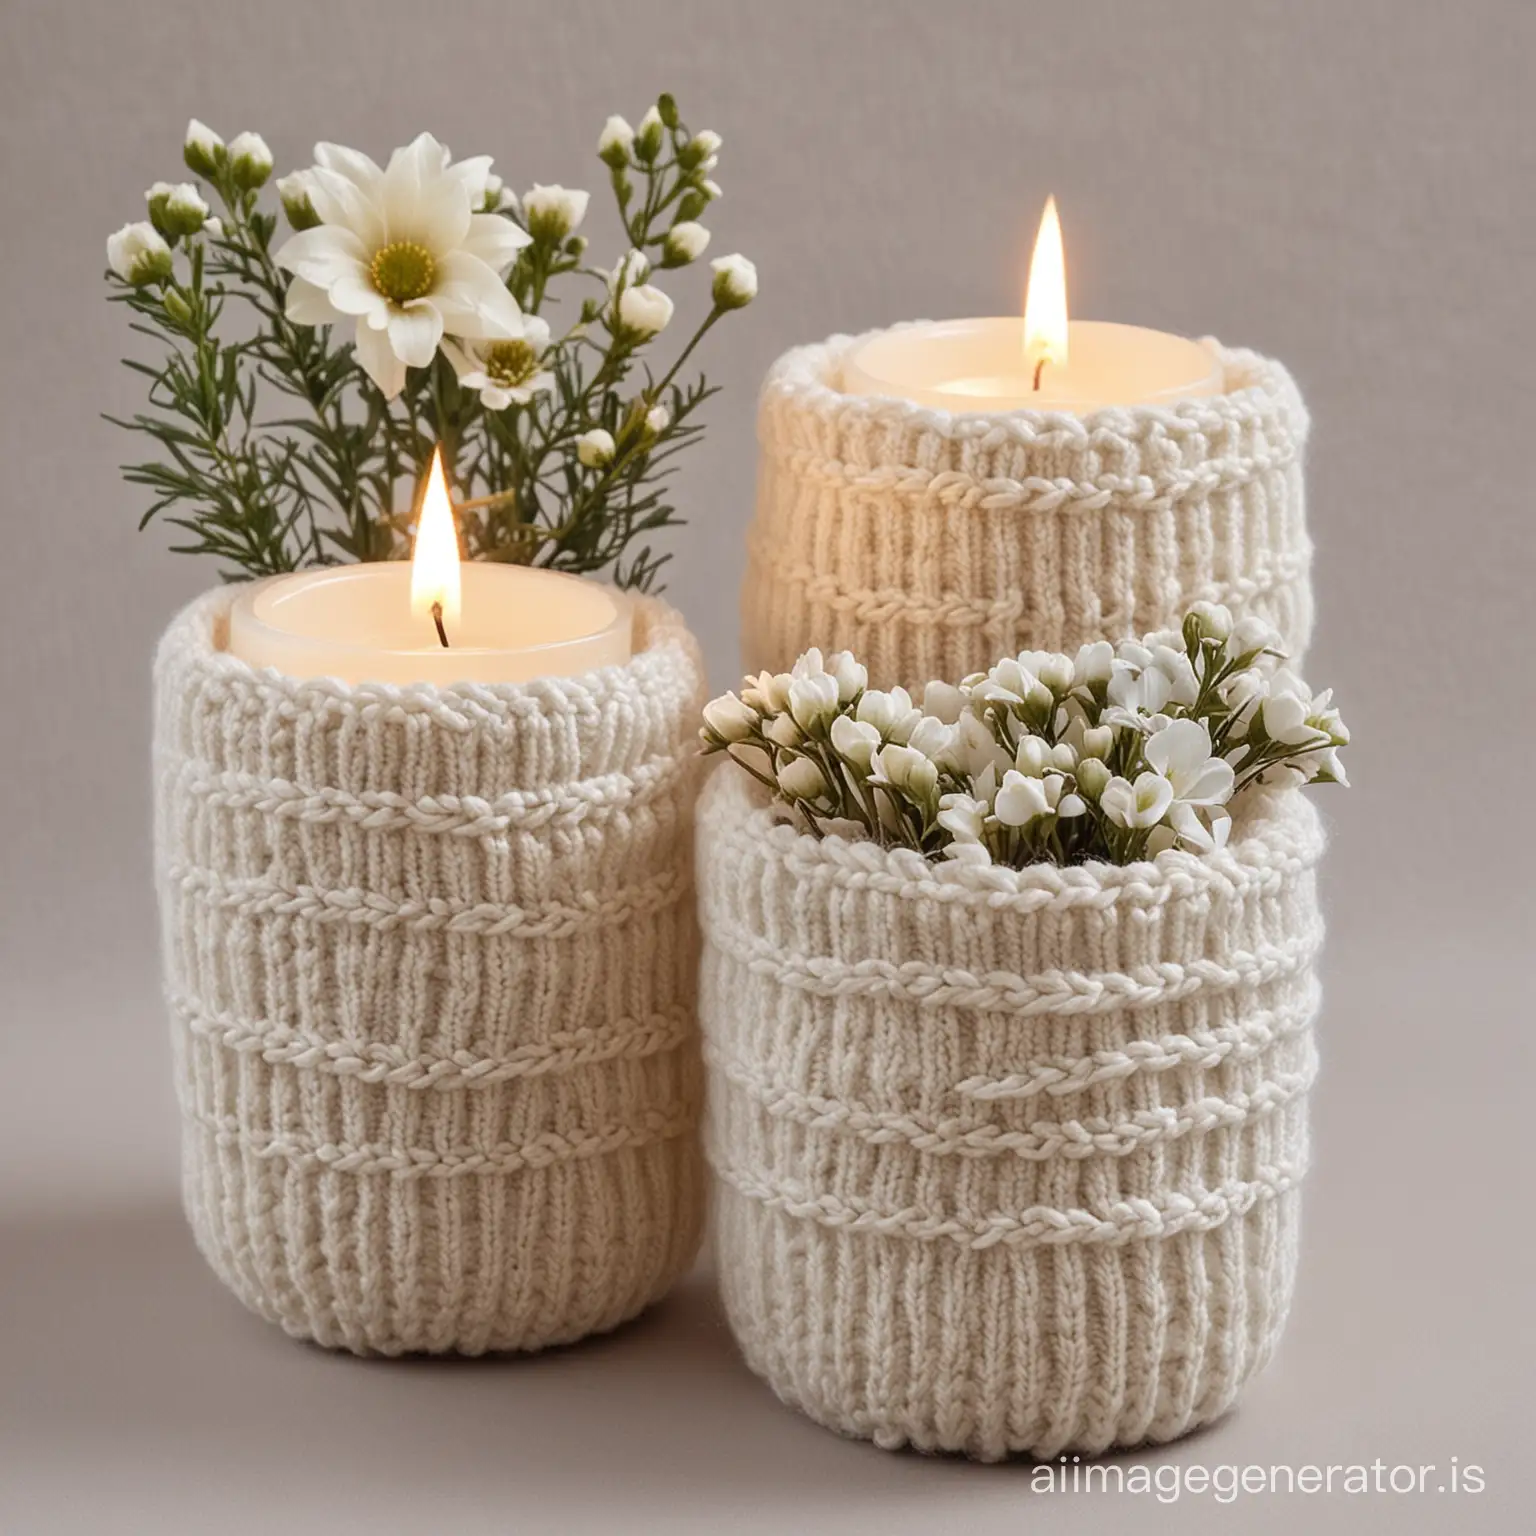 Winter-Wedding-Knitted-Vase-Cozies-with-Fresh-Flowers